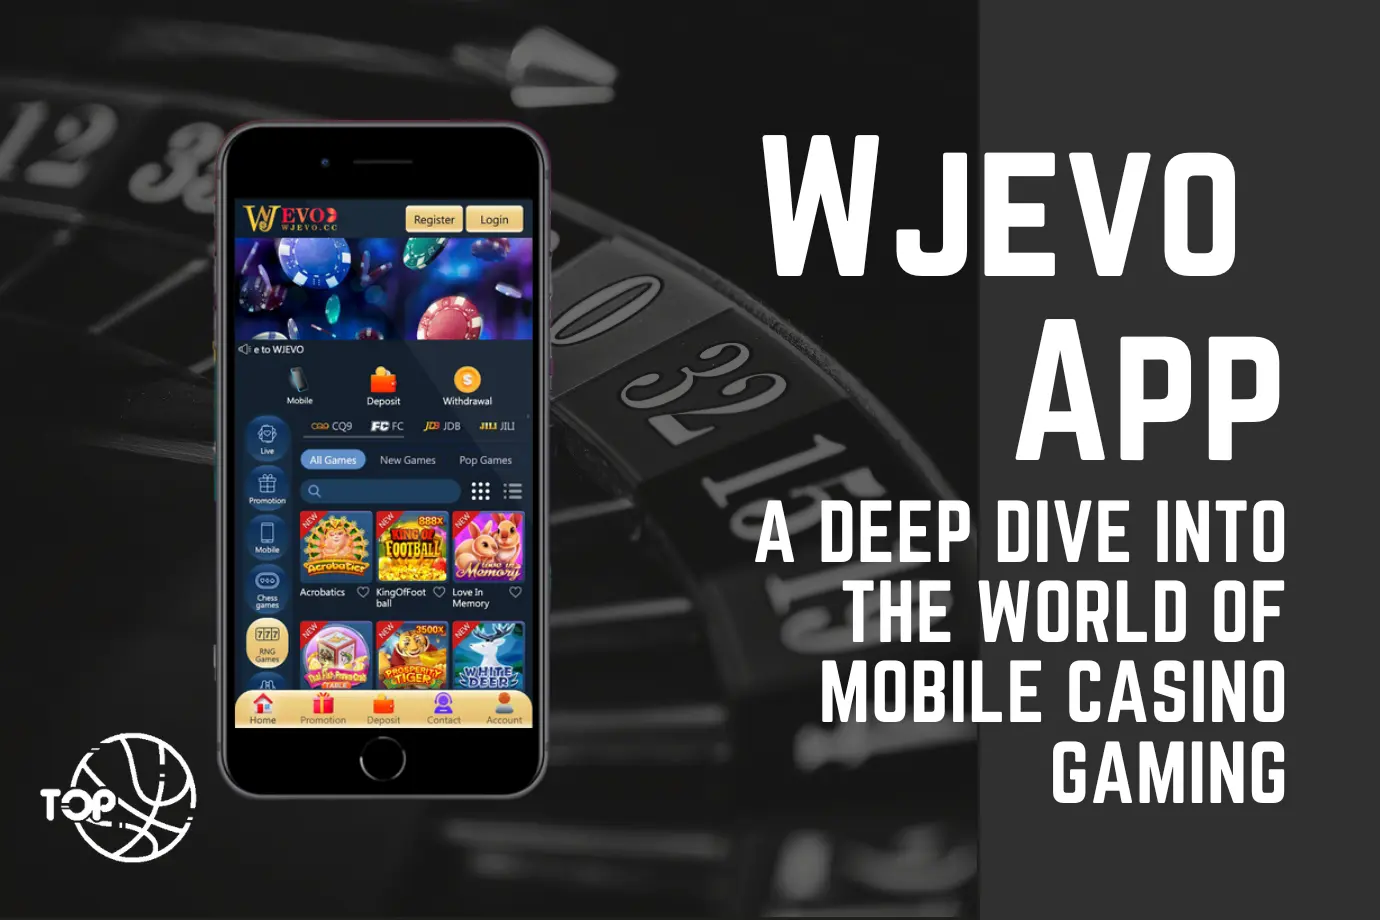 Wjevo App: A Deep Dive into the World of Mobile Casino Gaming